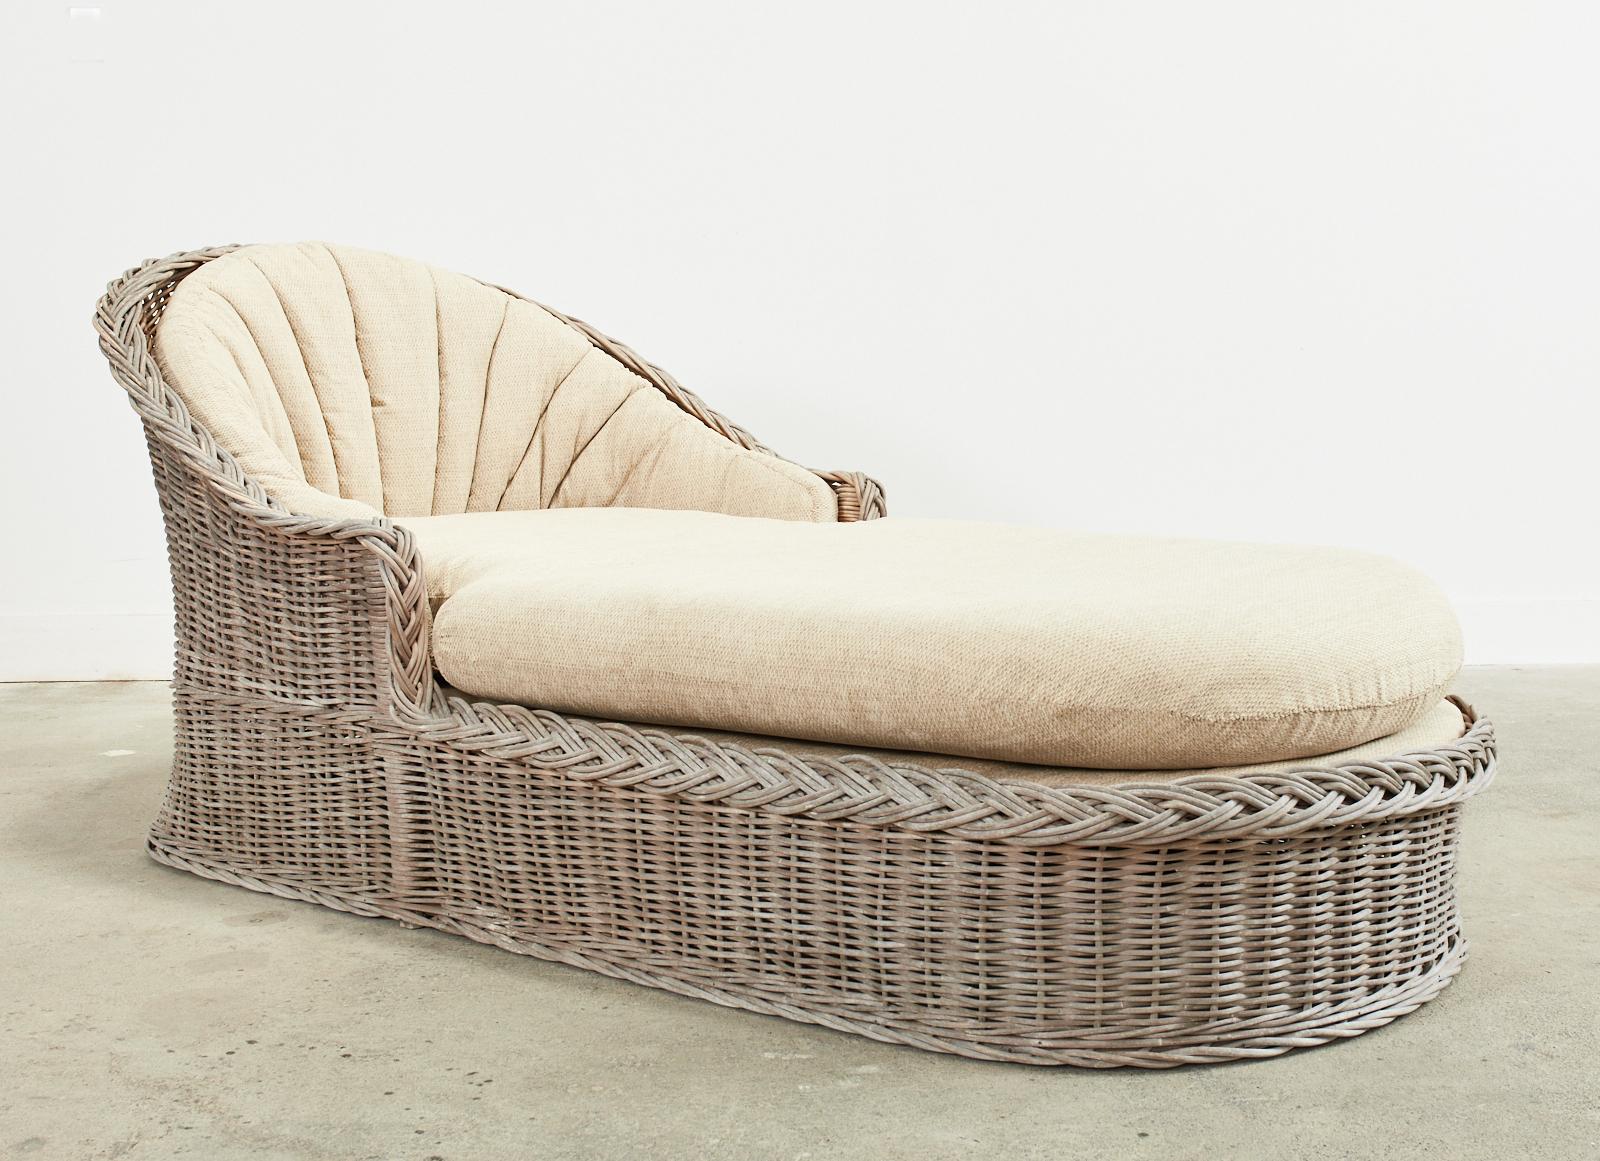 Large organic modern Michael Taylor style chaise longue or lounge by The Wicker Works San Francisco, CA. The lounge features a rattan frame covered with woven rattan wicker having a decorative braided border. The chair is oversized with a generous